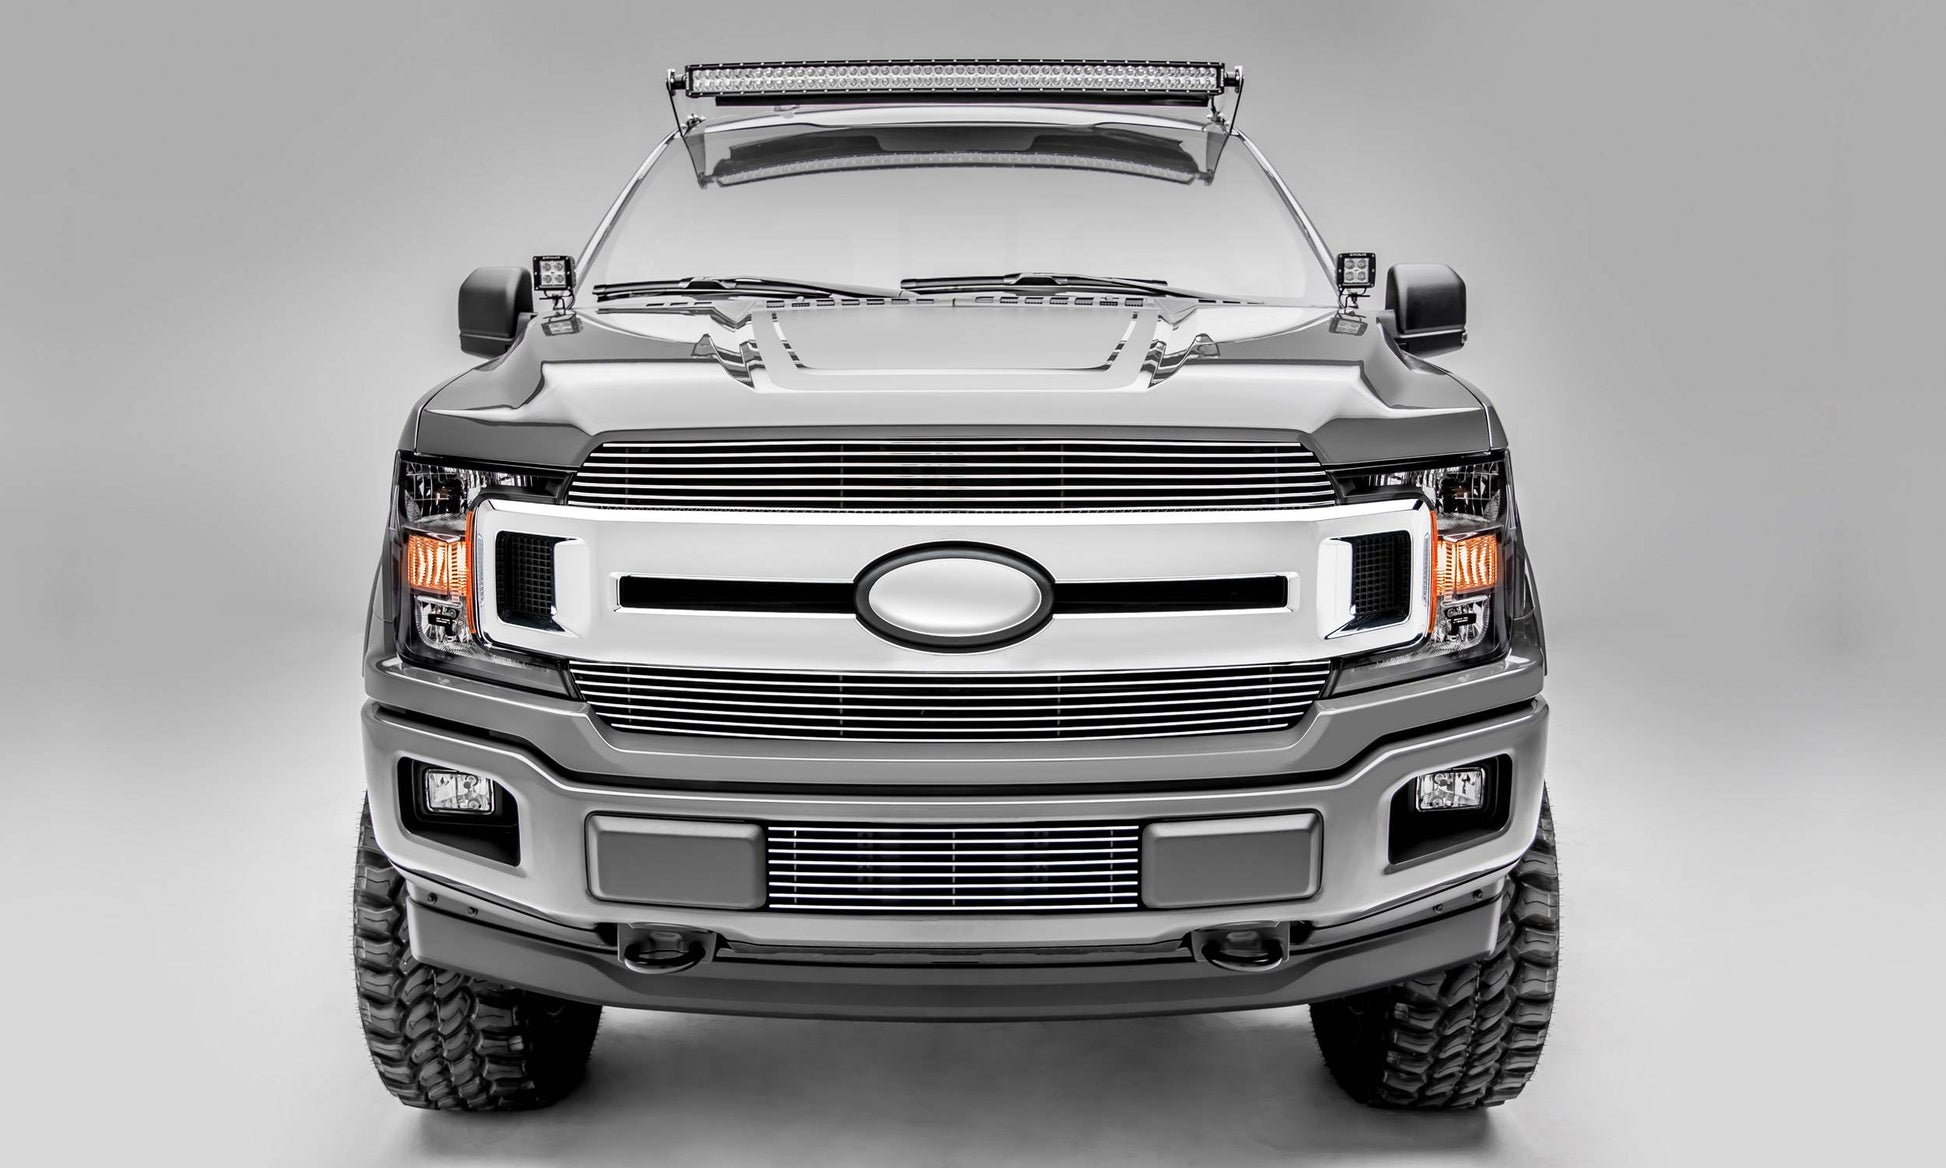 T-REX Grilles 20571 Polished Aluminum Horizontal Grille Fits 2018-2020 Ford F-150 XLT F-150 Lariat